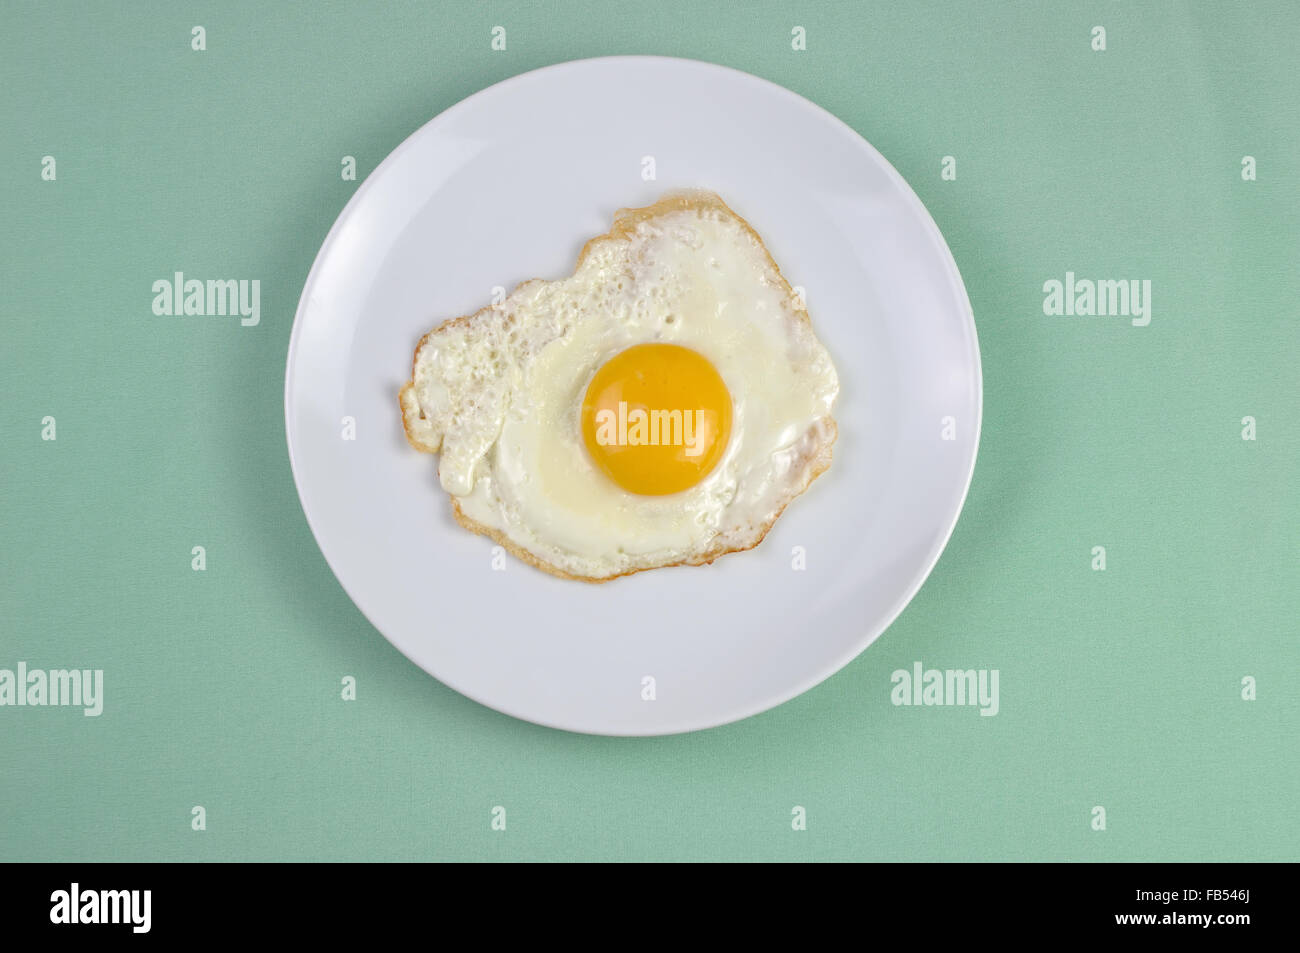 Fried eggs on a white plate and green background Stock Photo